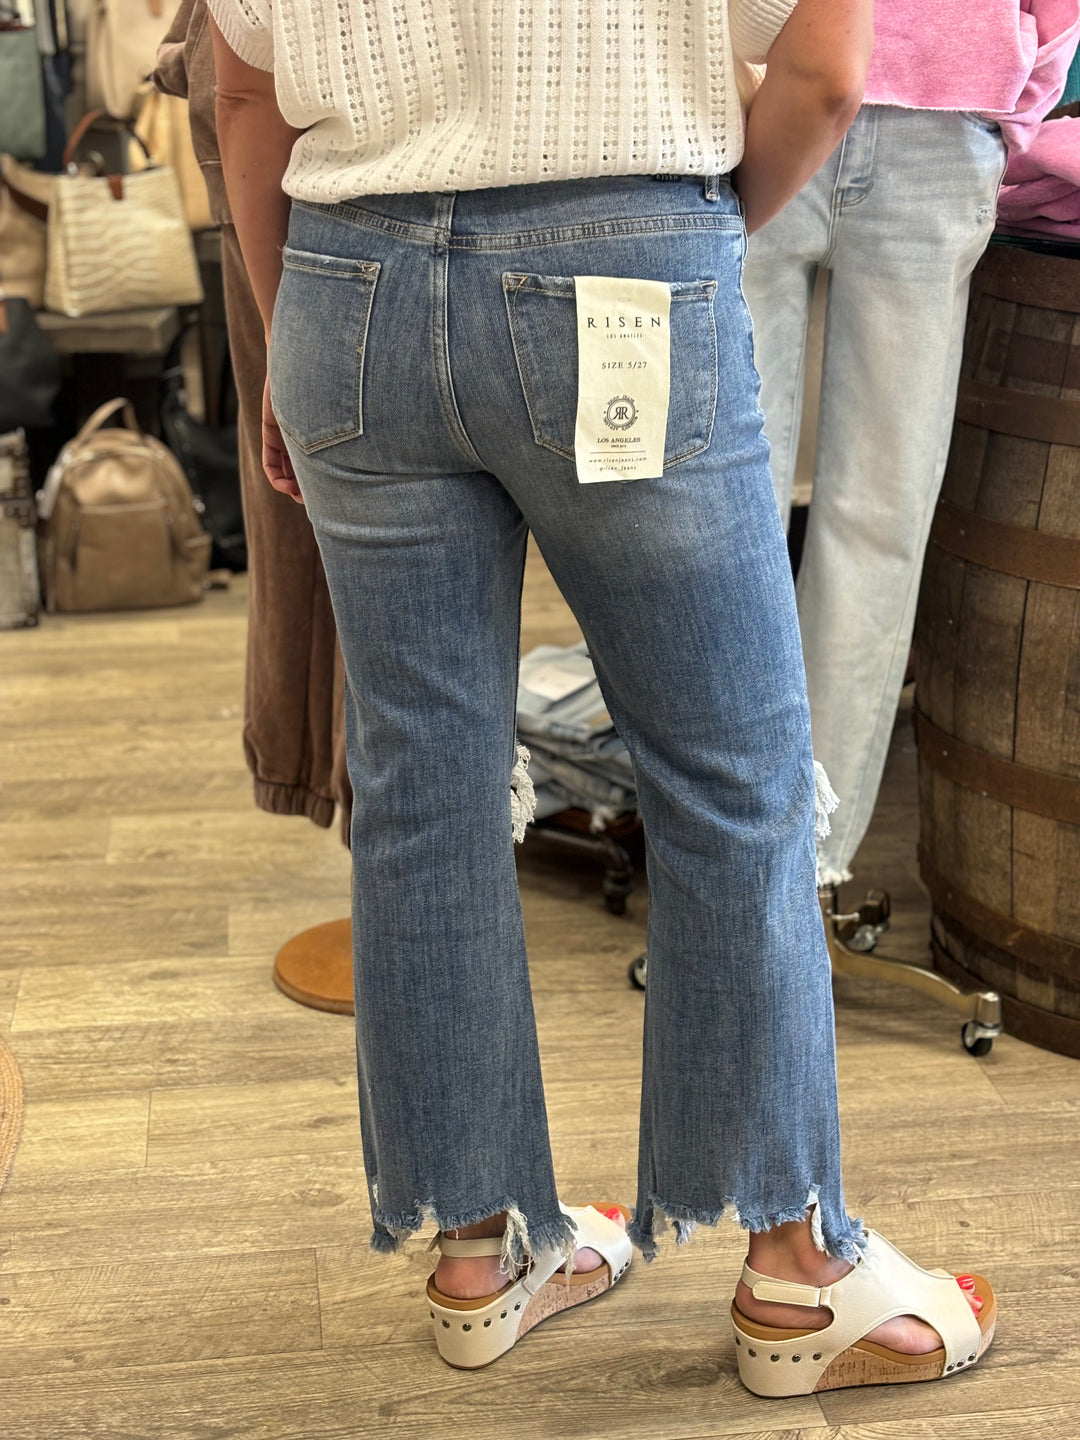 Risen Destroyed Cropped Jeans | Medium-Jeans-Risen-Evergreen Boutique, Women’s Fashion Boutique in Santa Claus, Indiana